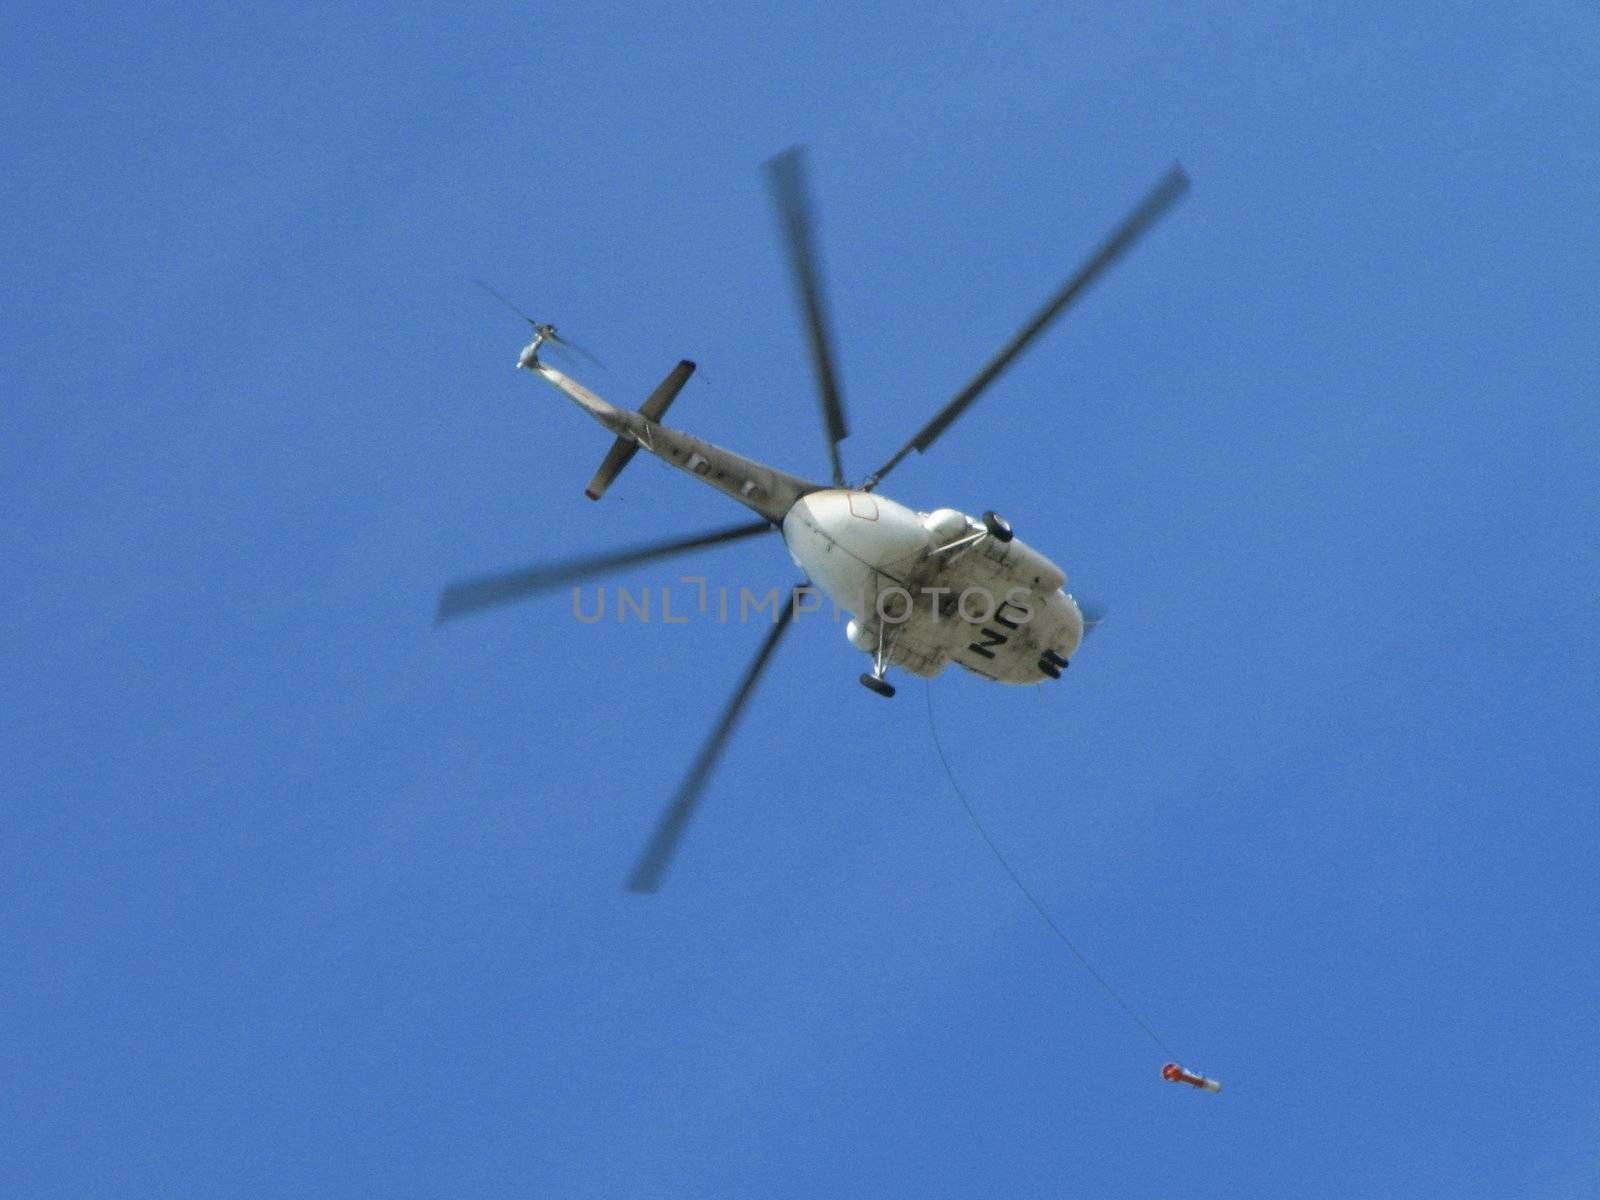 The helicopter carries out the task